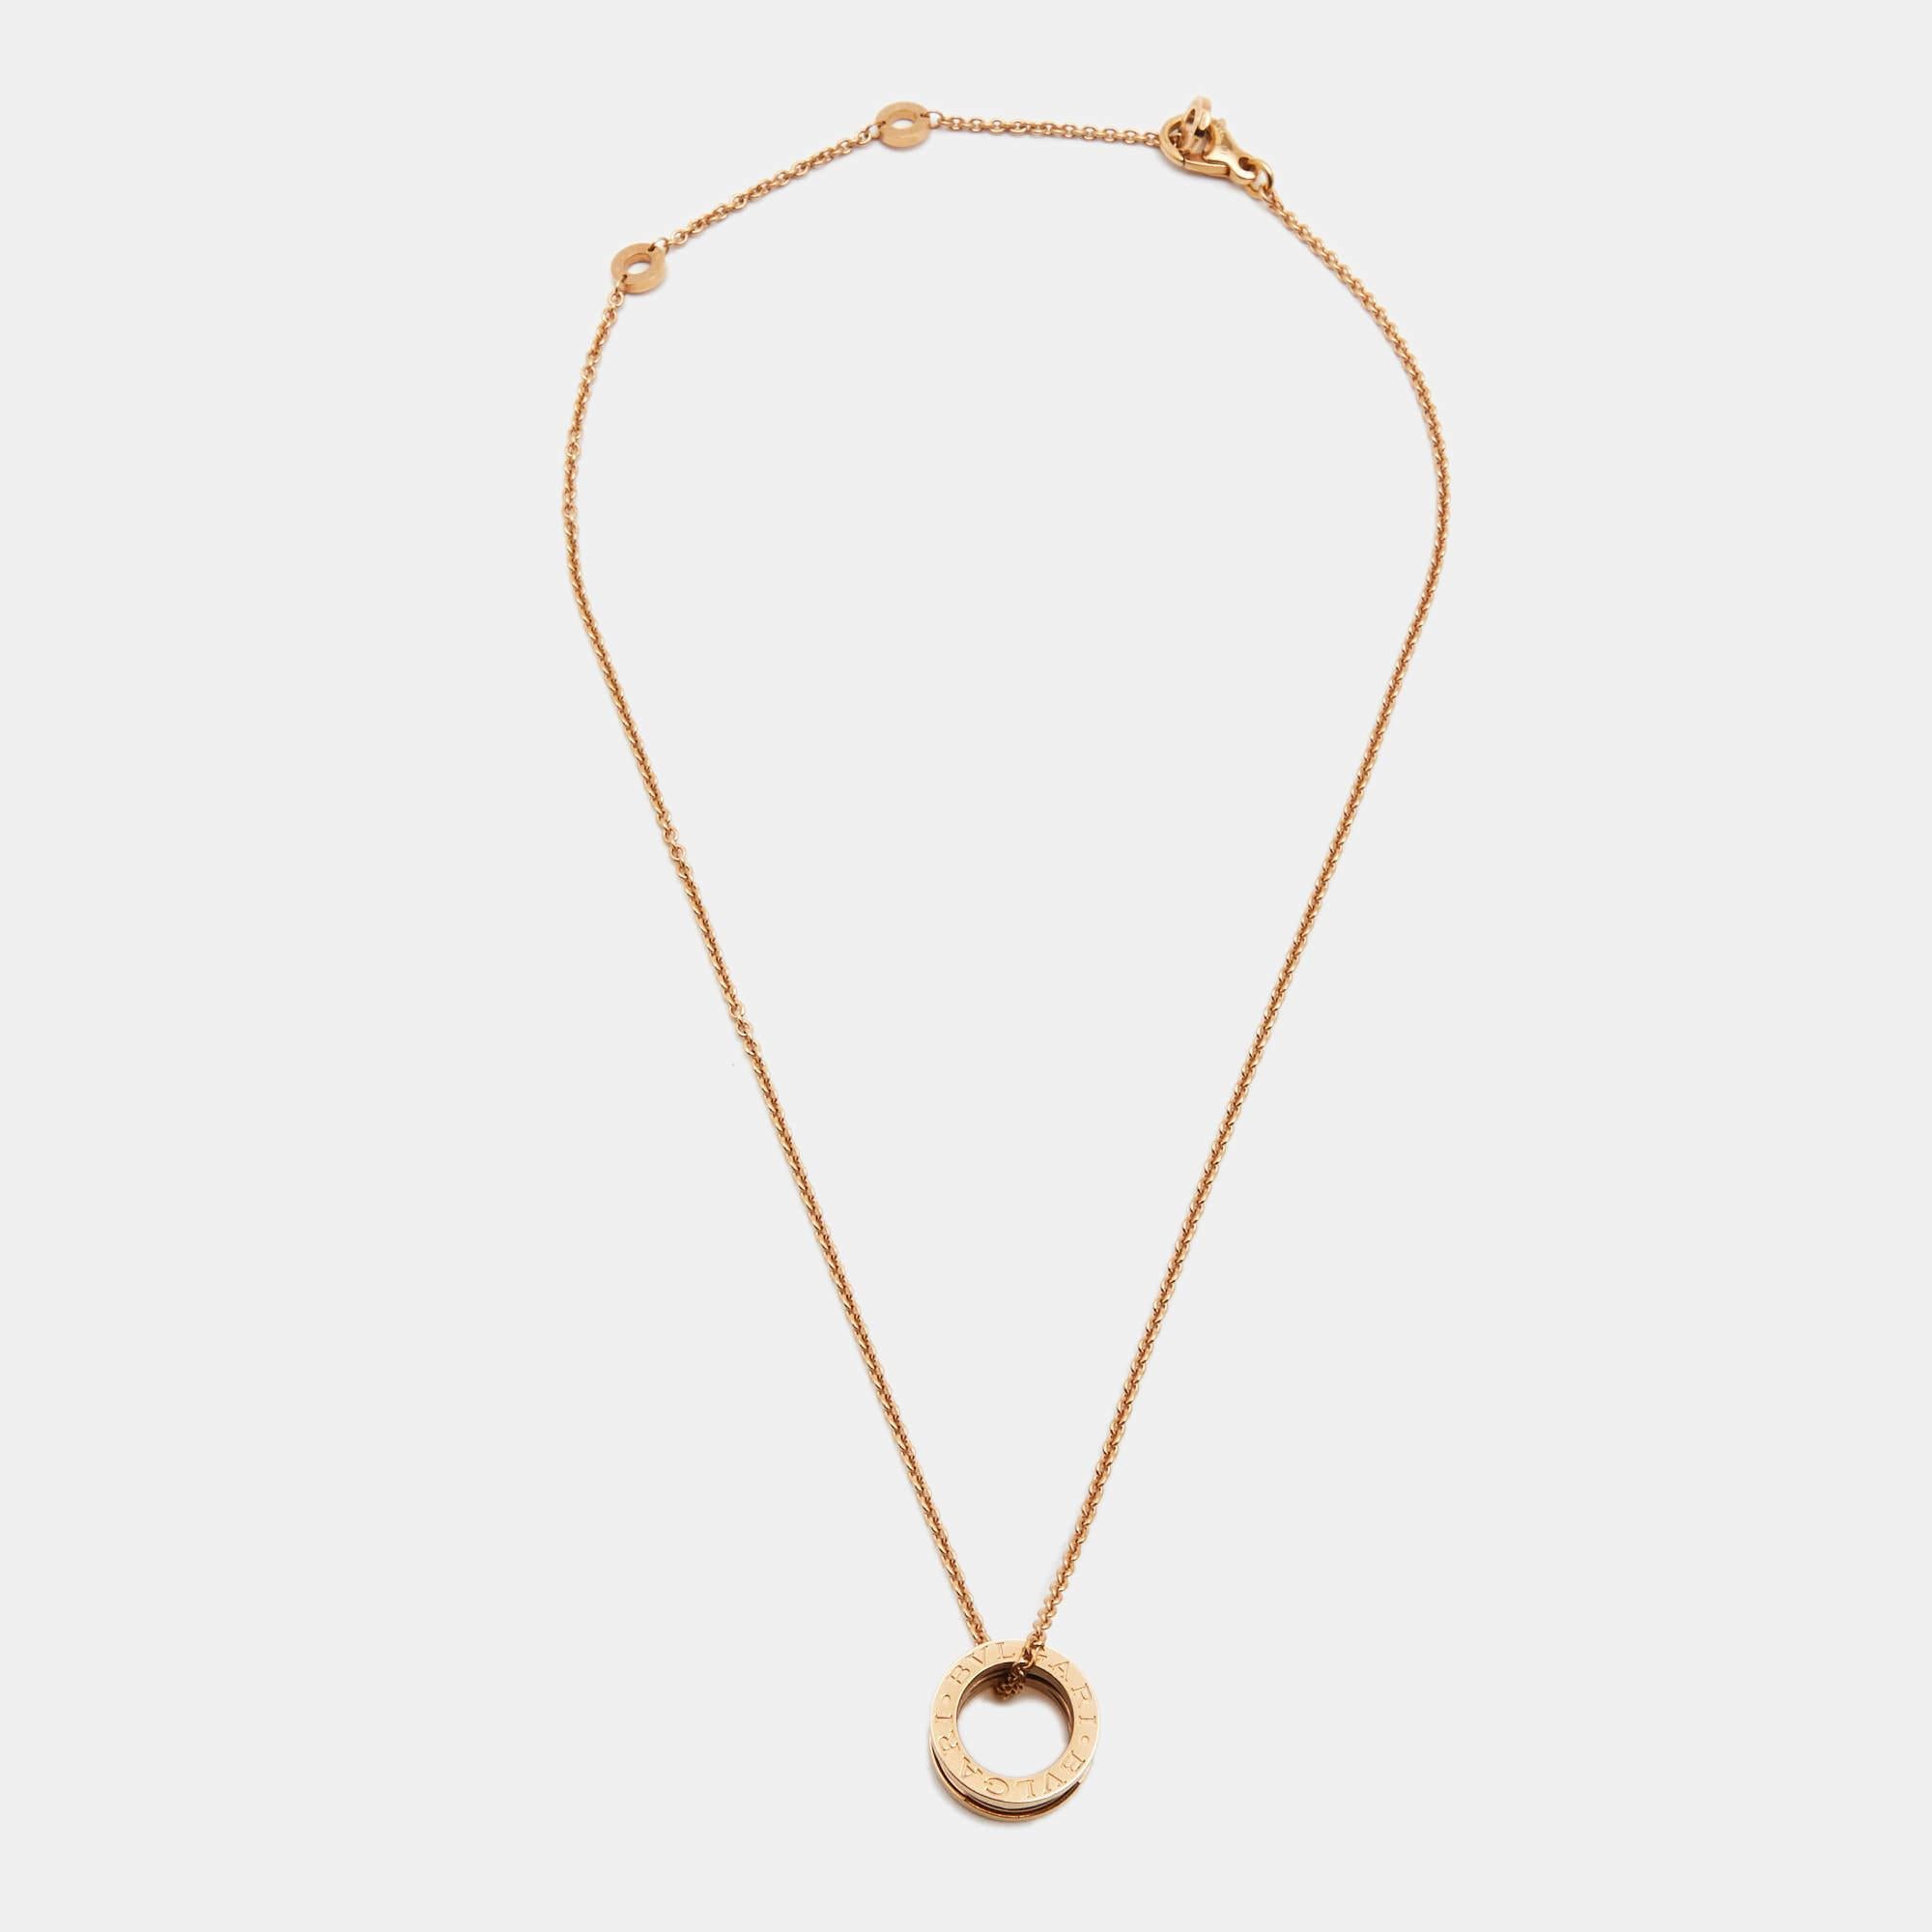 Flaunt your love for minimalist yet classy jewelry with this simple and elegant necklace by Bvlgari. Crafted out of 18k rose gold, it flaunts the iconic B.Zero black ceramic detailed ring as the pendant. A delicate piece of jewelry that accents